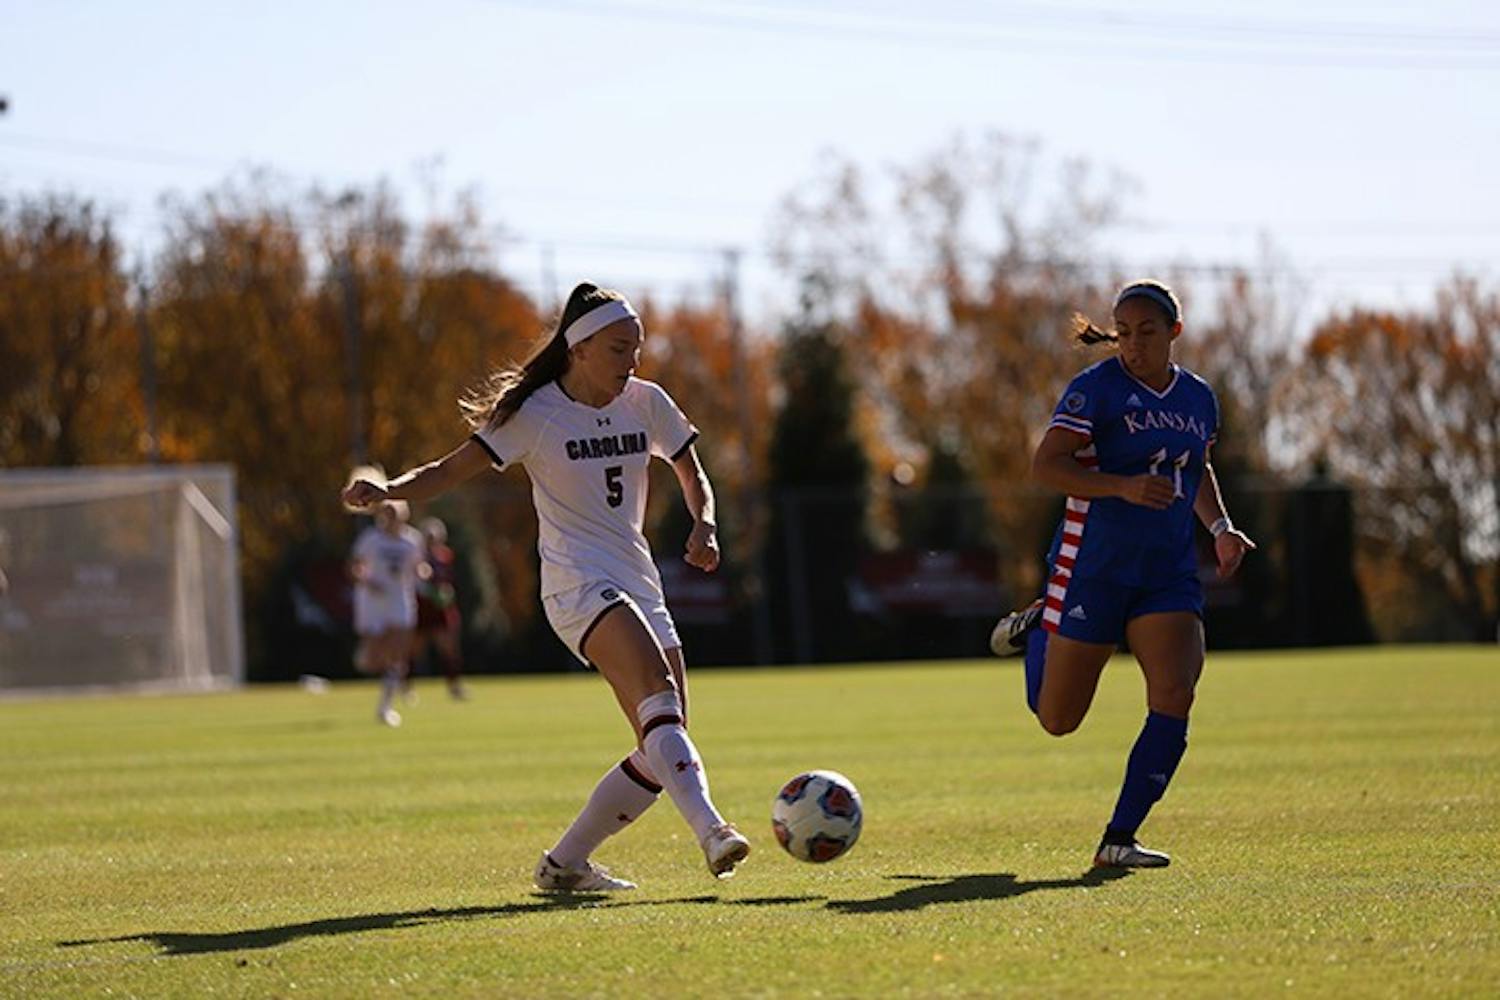 Senior forward Luciana Zullo dribbles the ball as a Kansas player runs beside her. Zullo tied in 9th place for NCAA Tournament points in a career with four.